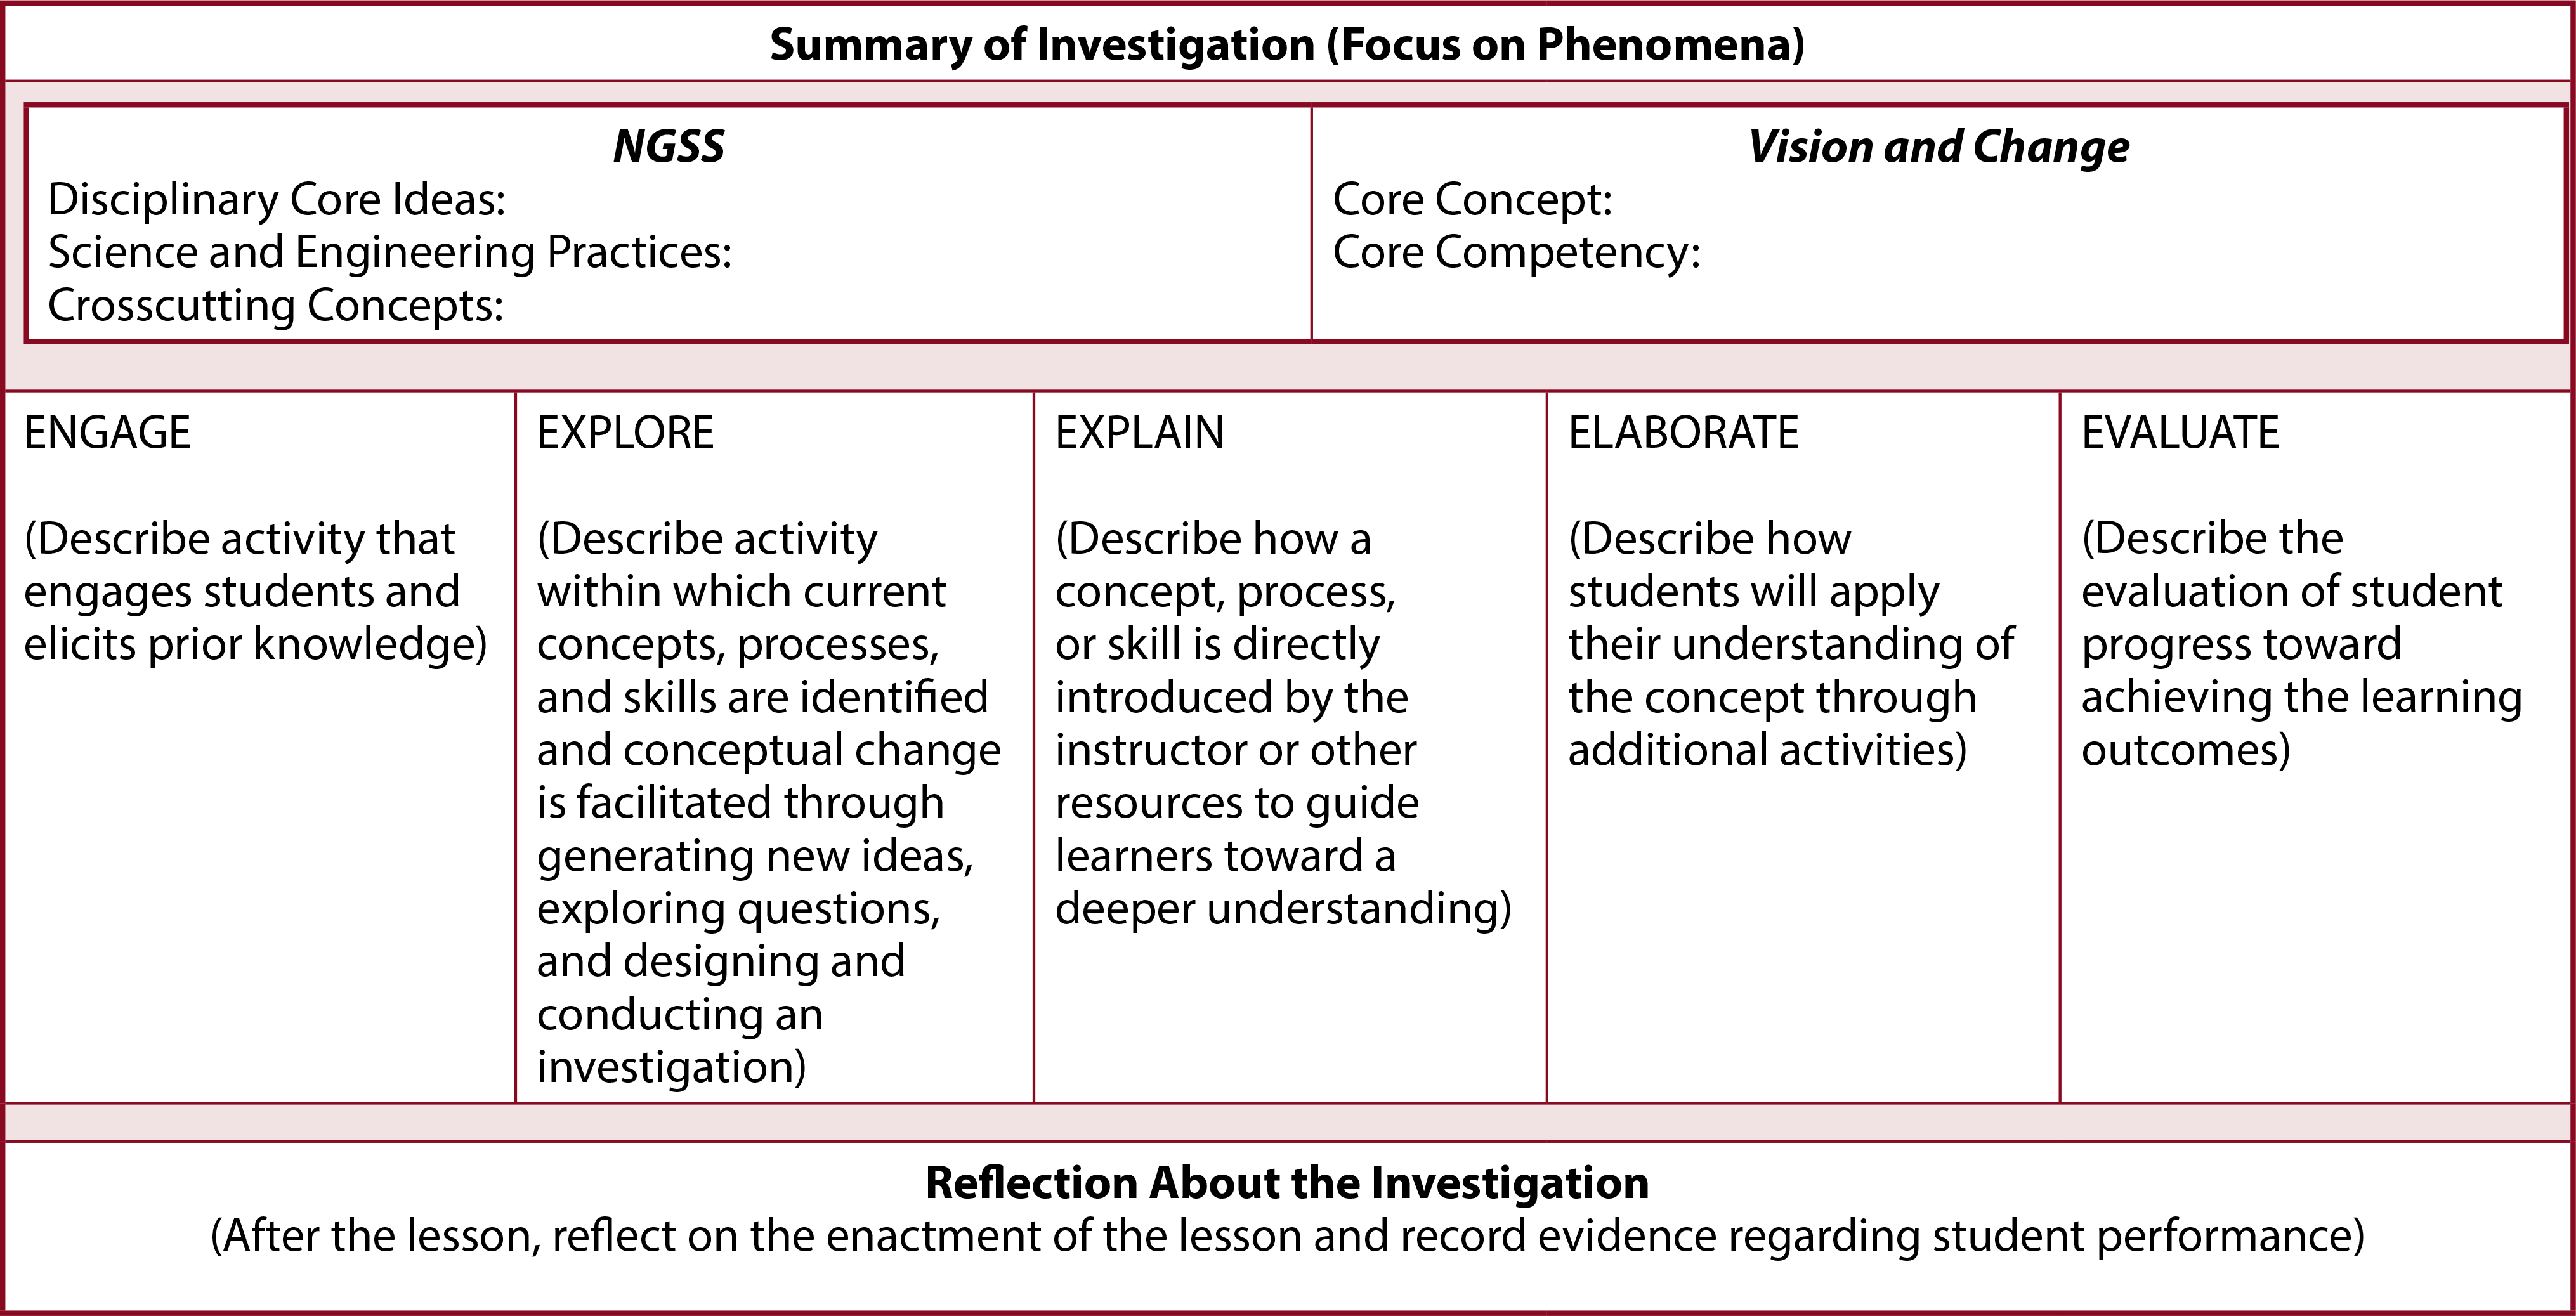 Template for the development of an inquiry-based investigation in a life science course using the 5E model.